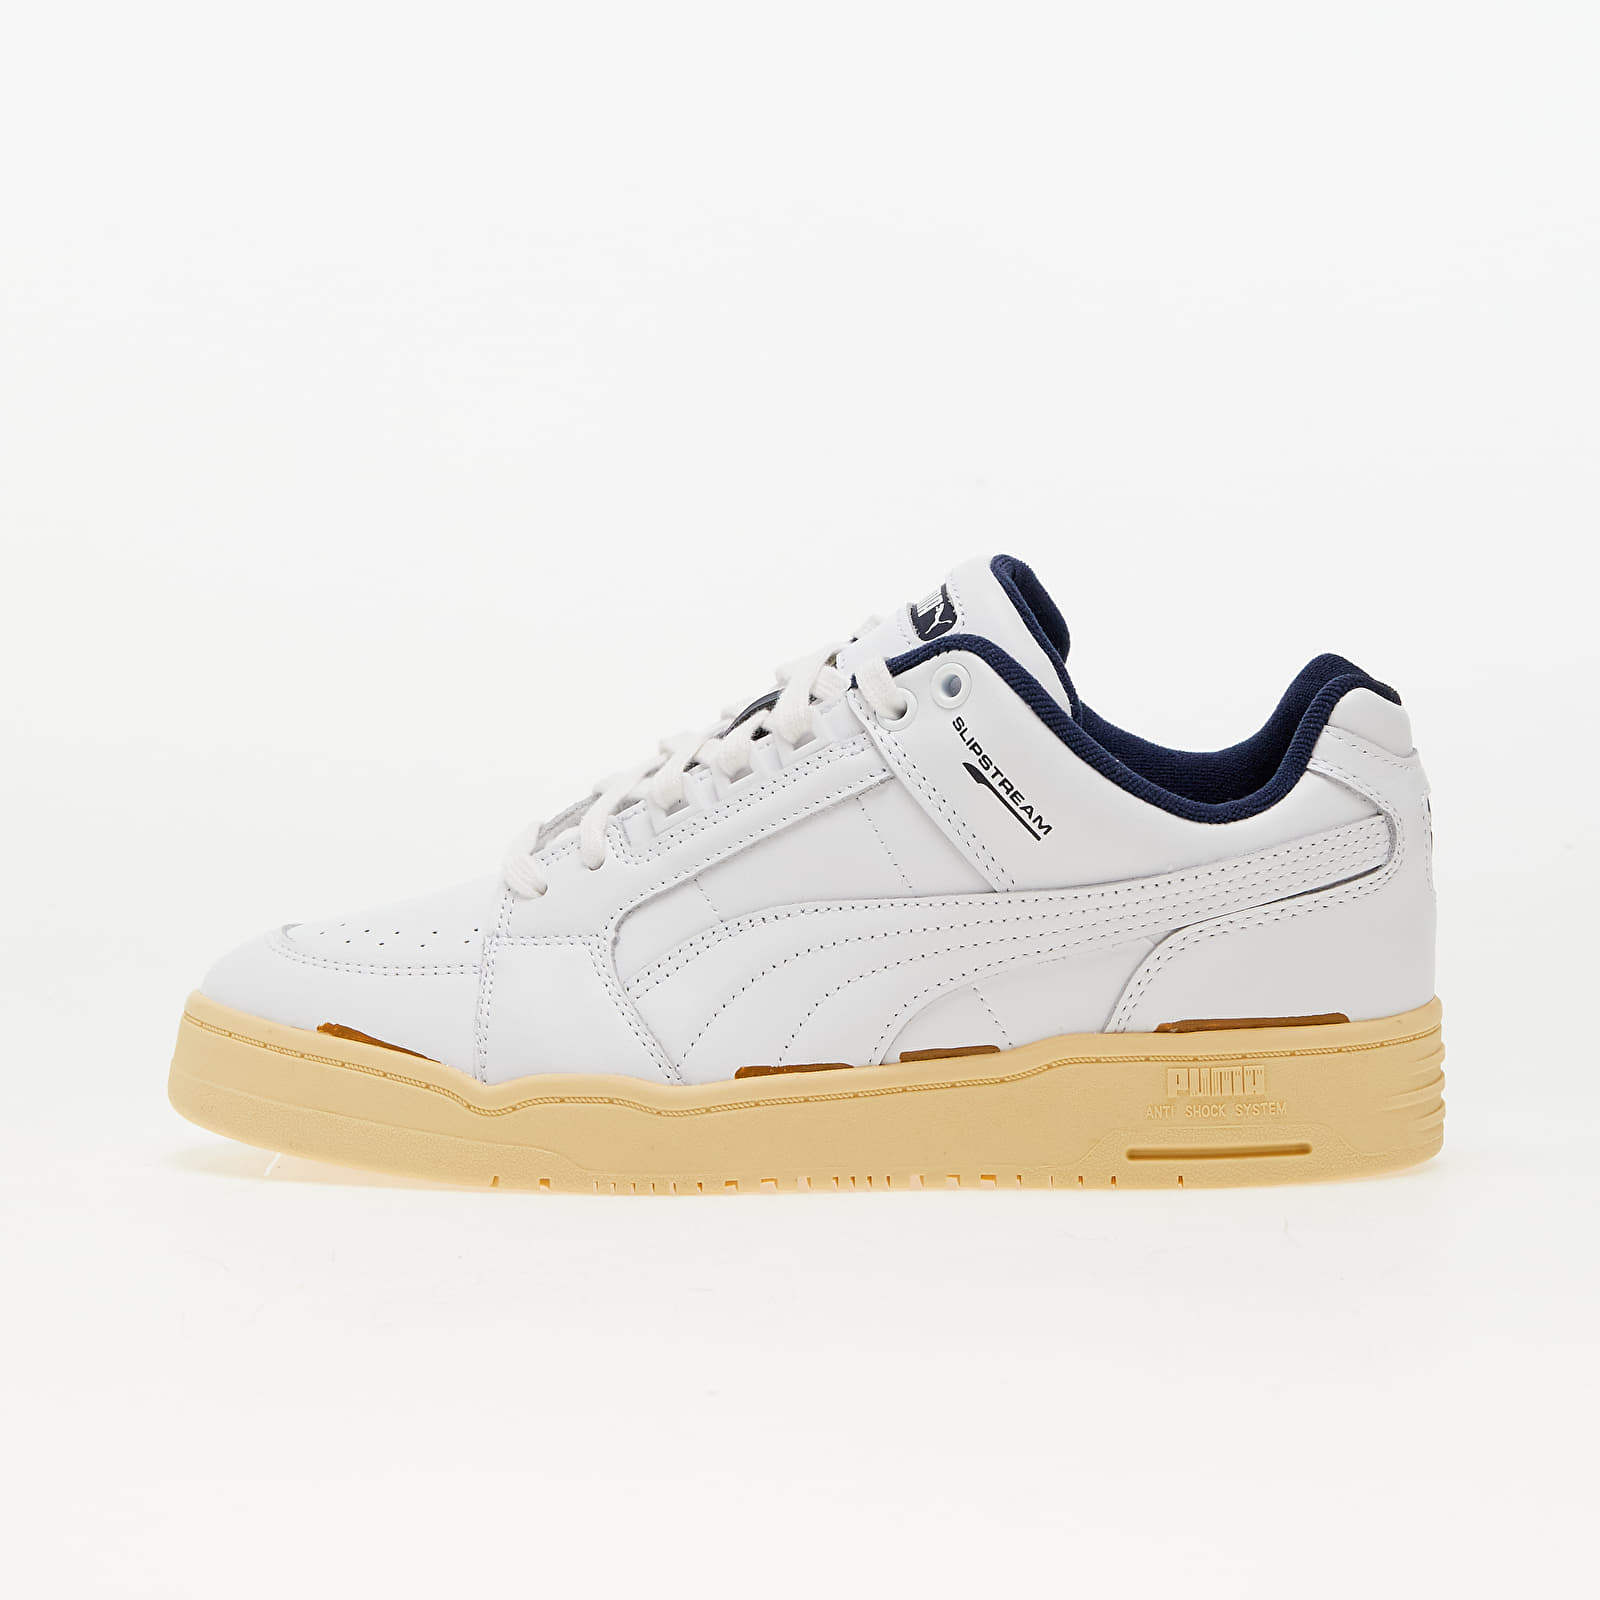 Baskets et chaussures pour hommes Puma Slipstream Lo The NeverWorn II White